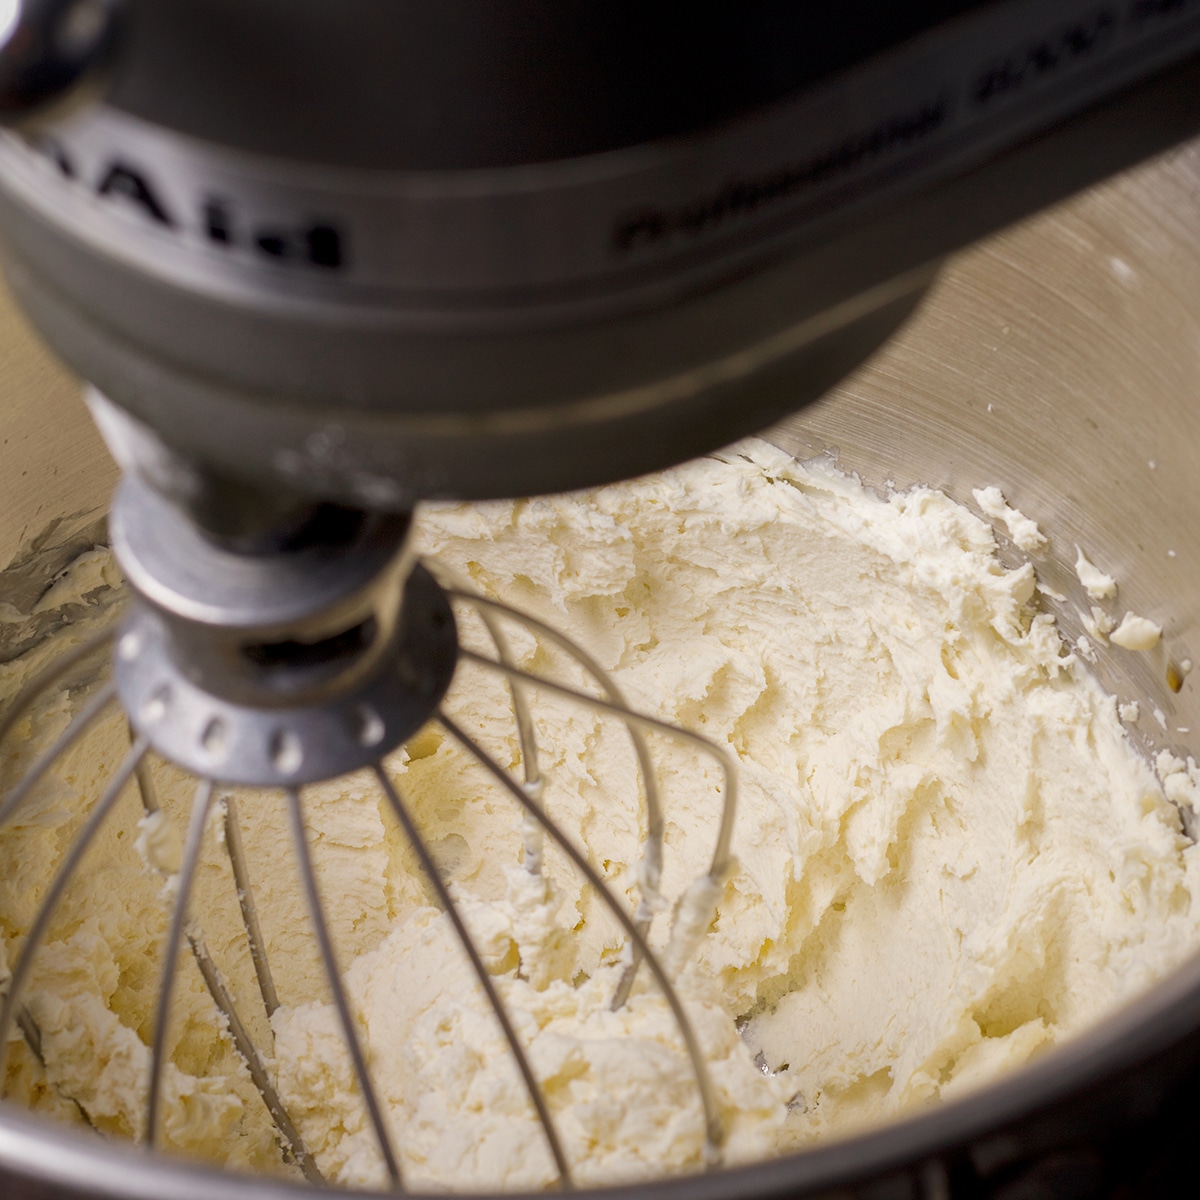 Using an electric mixer to beat mascarpone cheese and sugar.